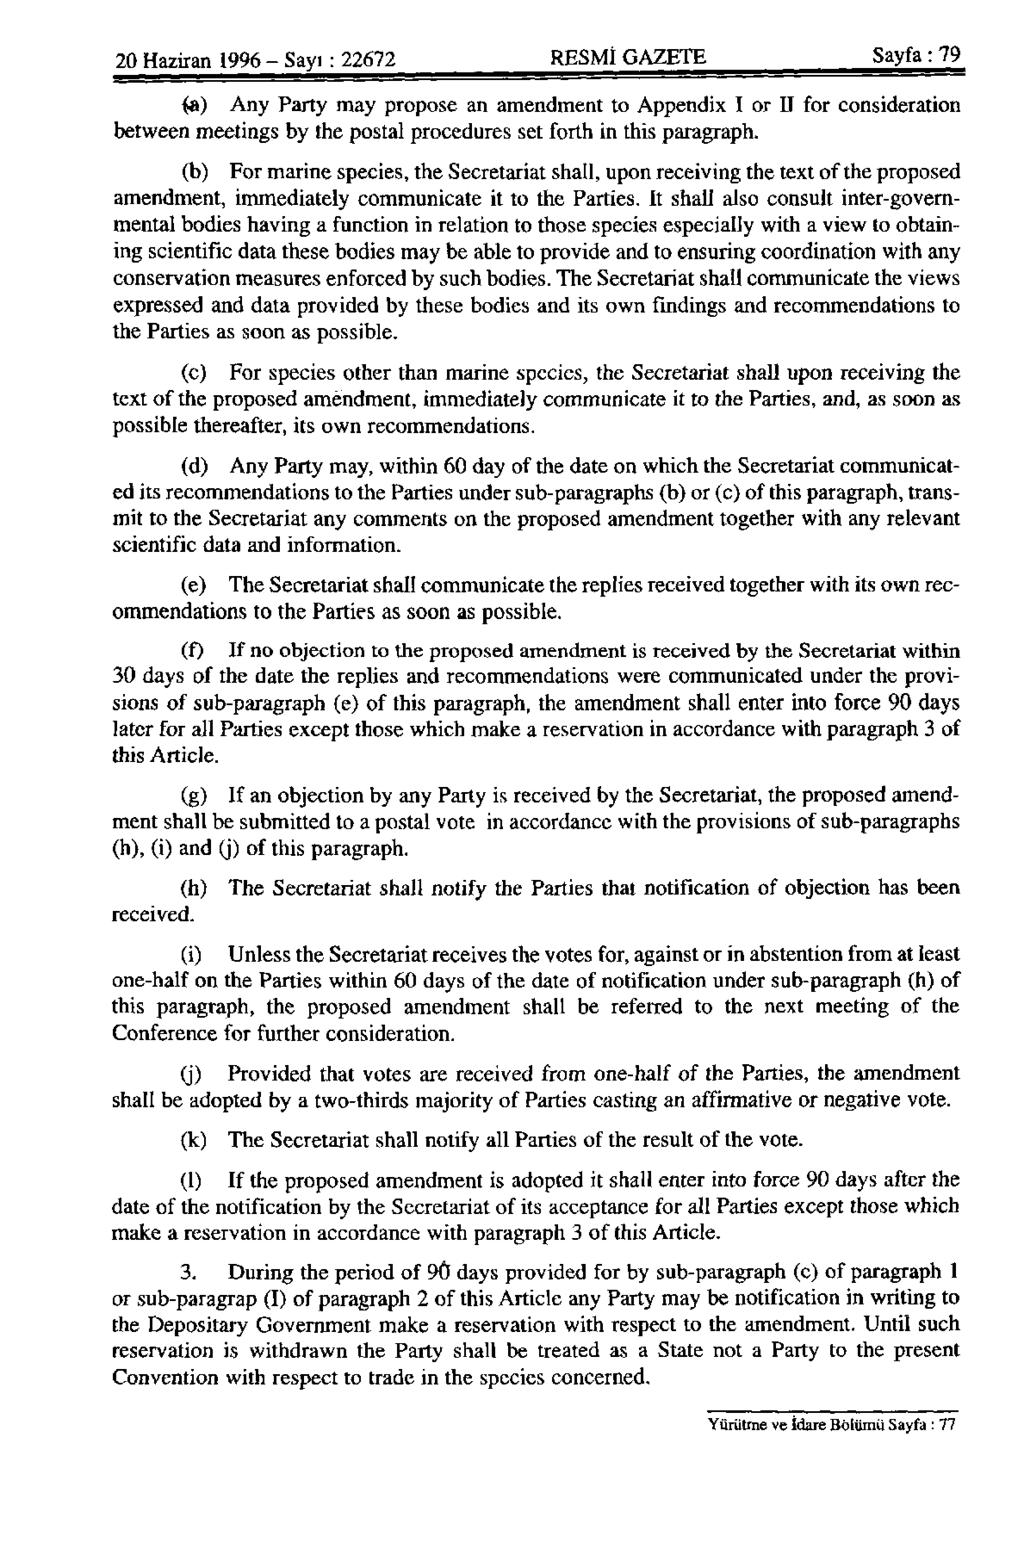 20 Haziran 1996 - Sayı: 22672 RESMİ GAZETE Sayfa: 79 (a) Any Party may propose an amendment to Appendix I or II for consideration between meetings by the postal procedures set forth in this paragraph.